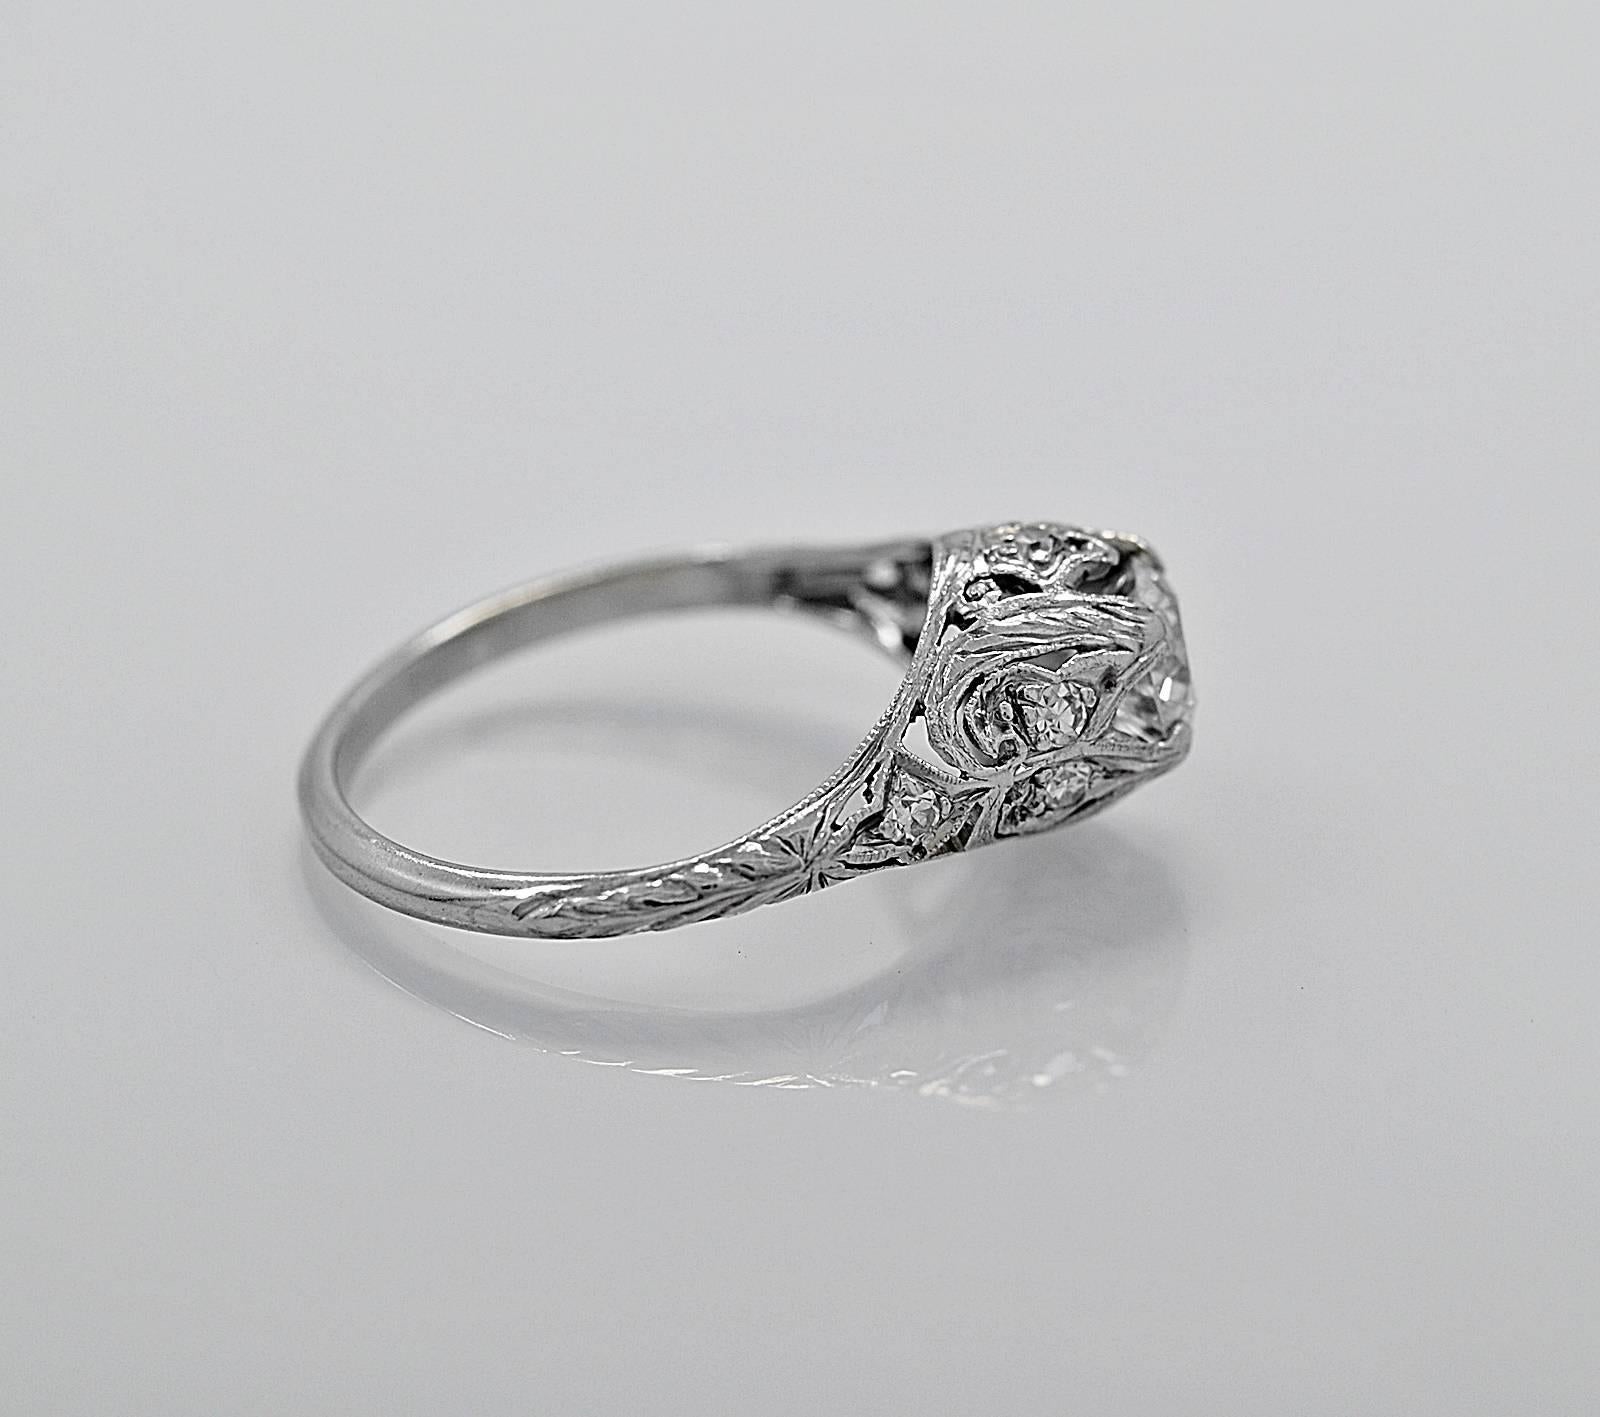 An exceptional Platinum & Diamond Art Deco antique engagement ring. This beautiful ring is highlighted by gorgeous filigree & pierced decoration, supporting a .63ct. apx. European cut diamond that is VS2 in clarity and G in color. The center diamond